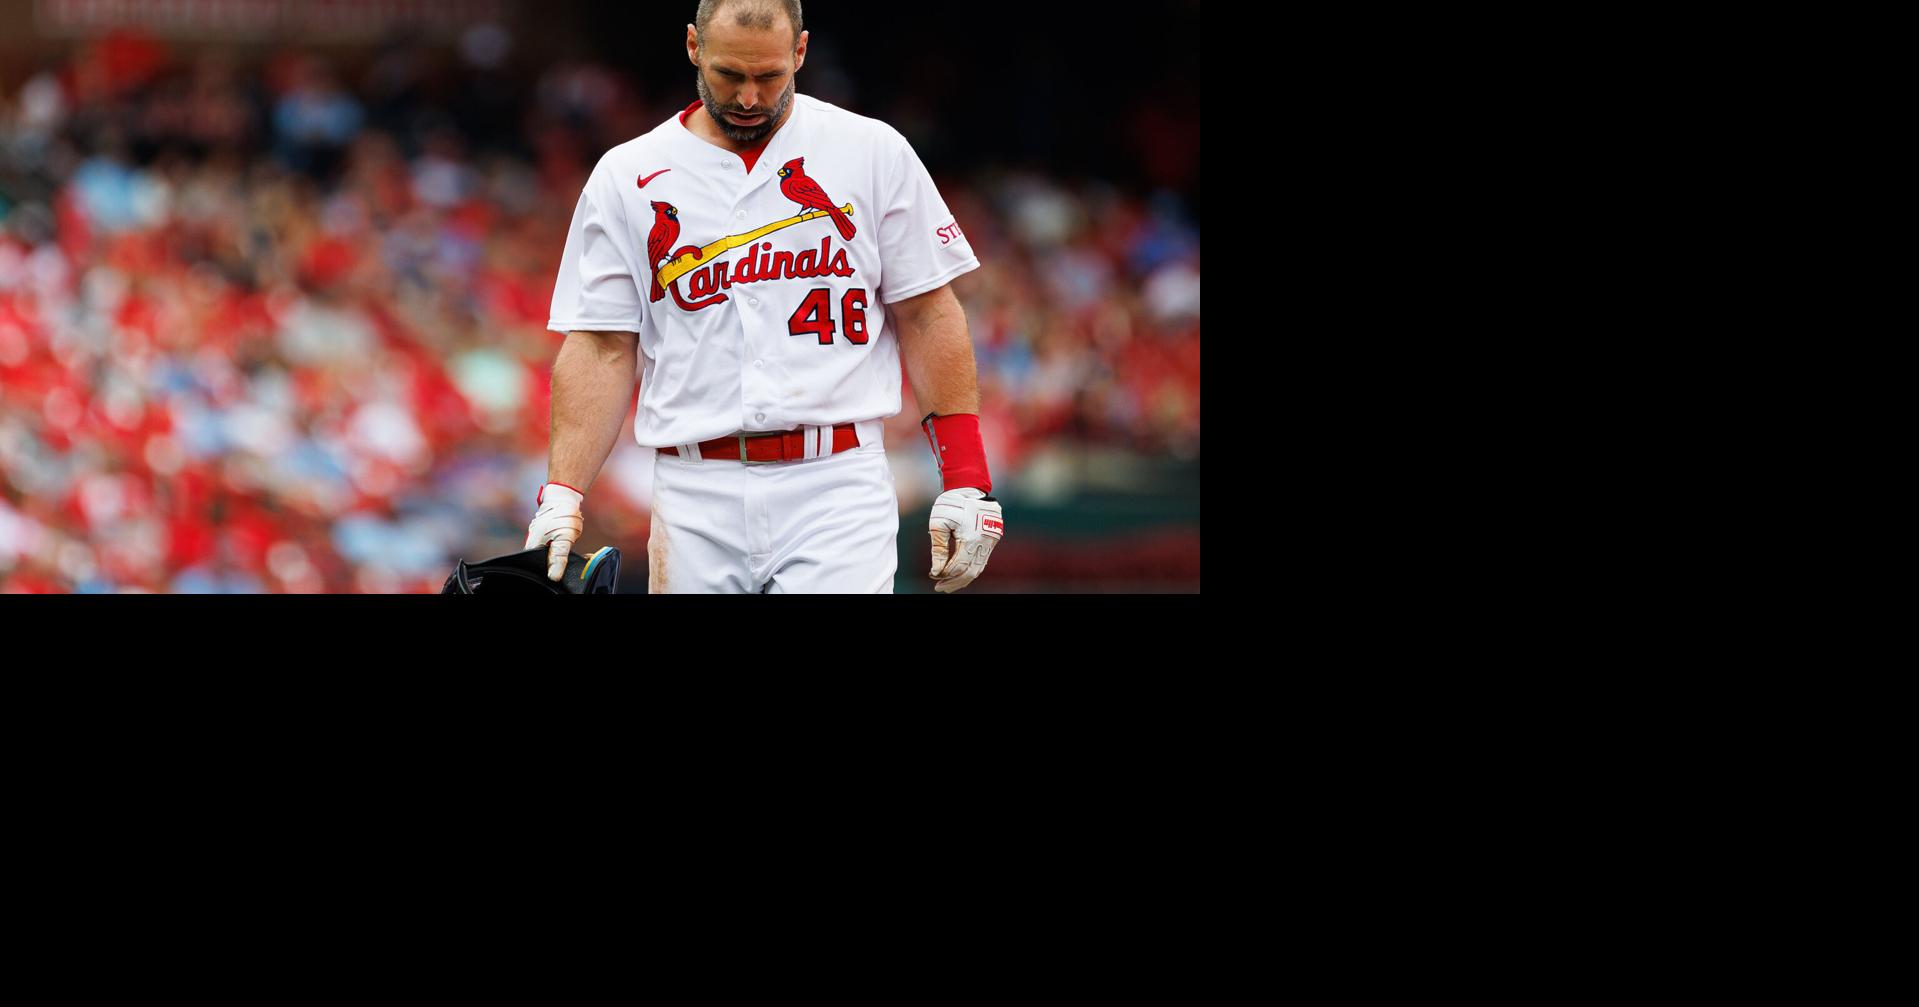 Cardinals turn Pirates mistakes into 4-3 victory